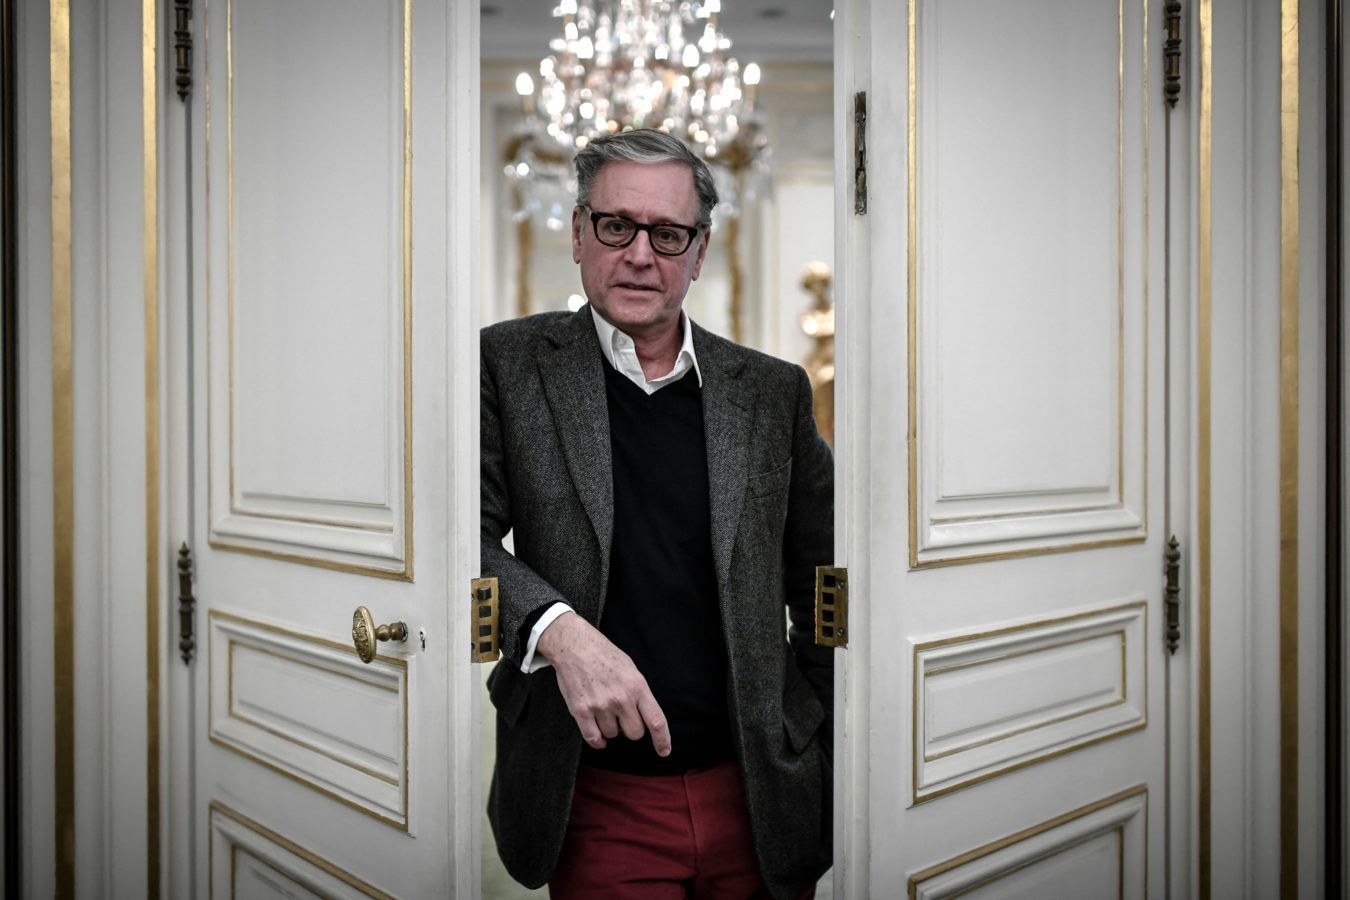 Paris Museums Commemorate the Work of Yves Saint Laurent with a Prestigious Exhibition